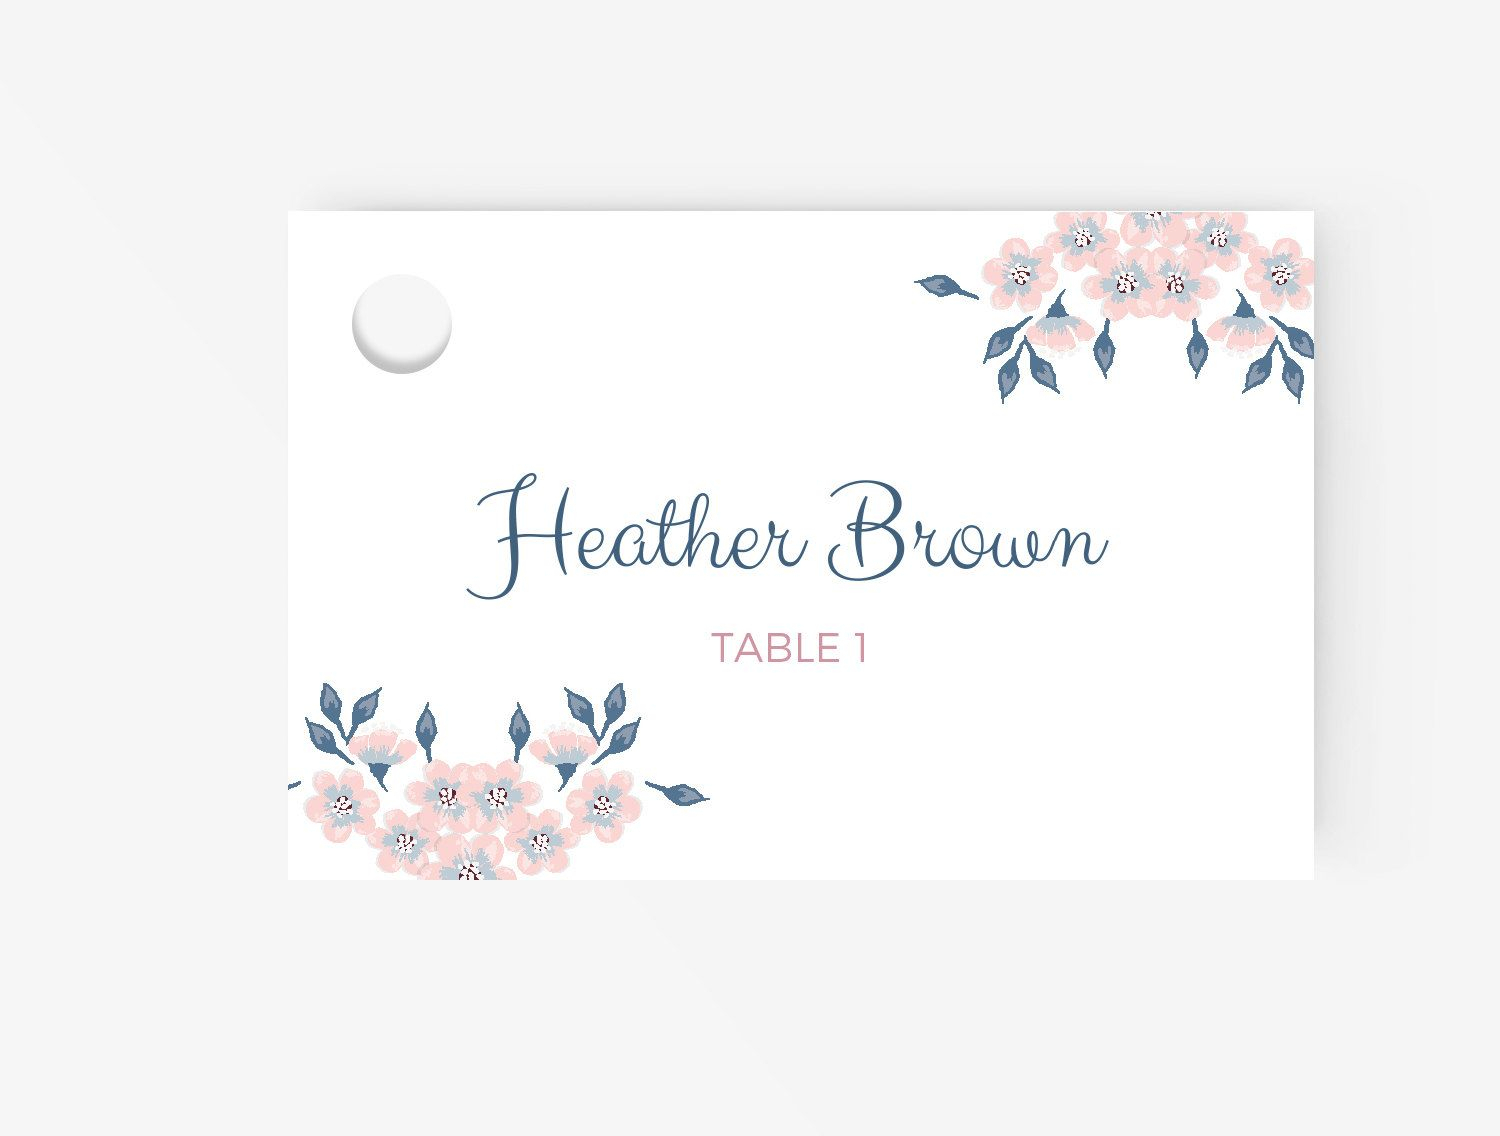 005 Free Place Card Template Ideas Cards Excellent Name Throughout Free Place Card Templates Download